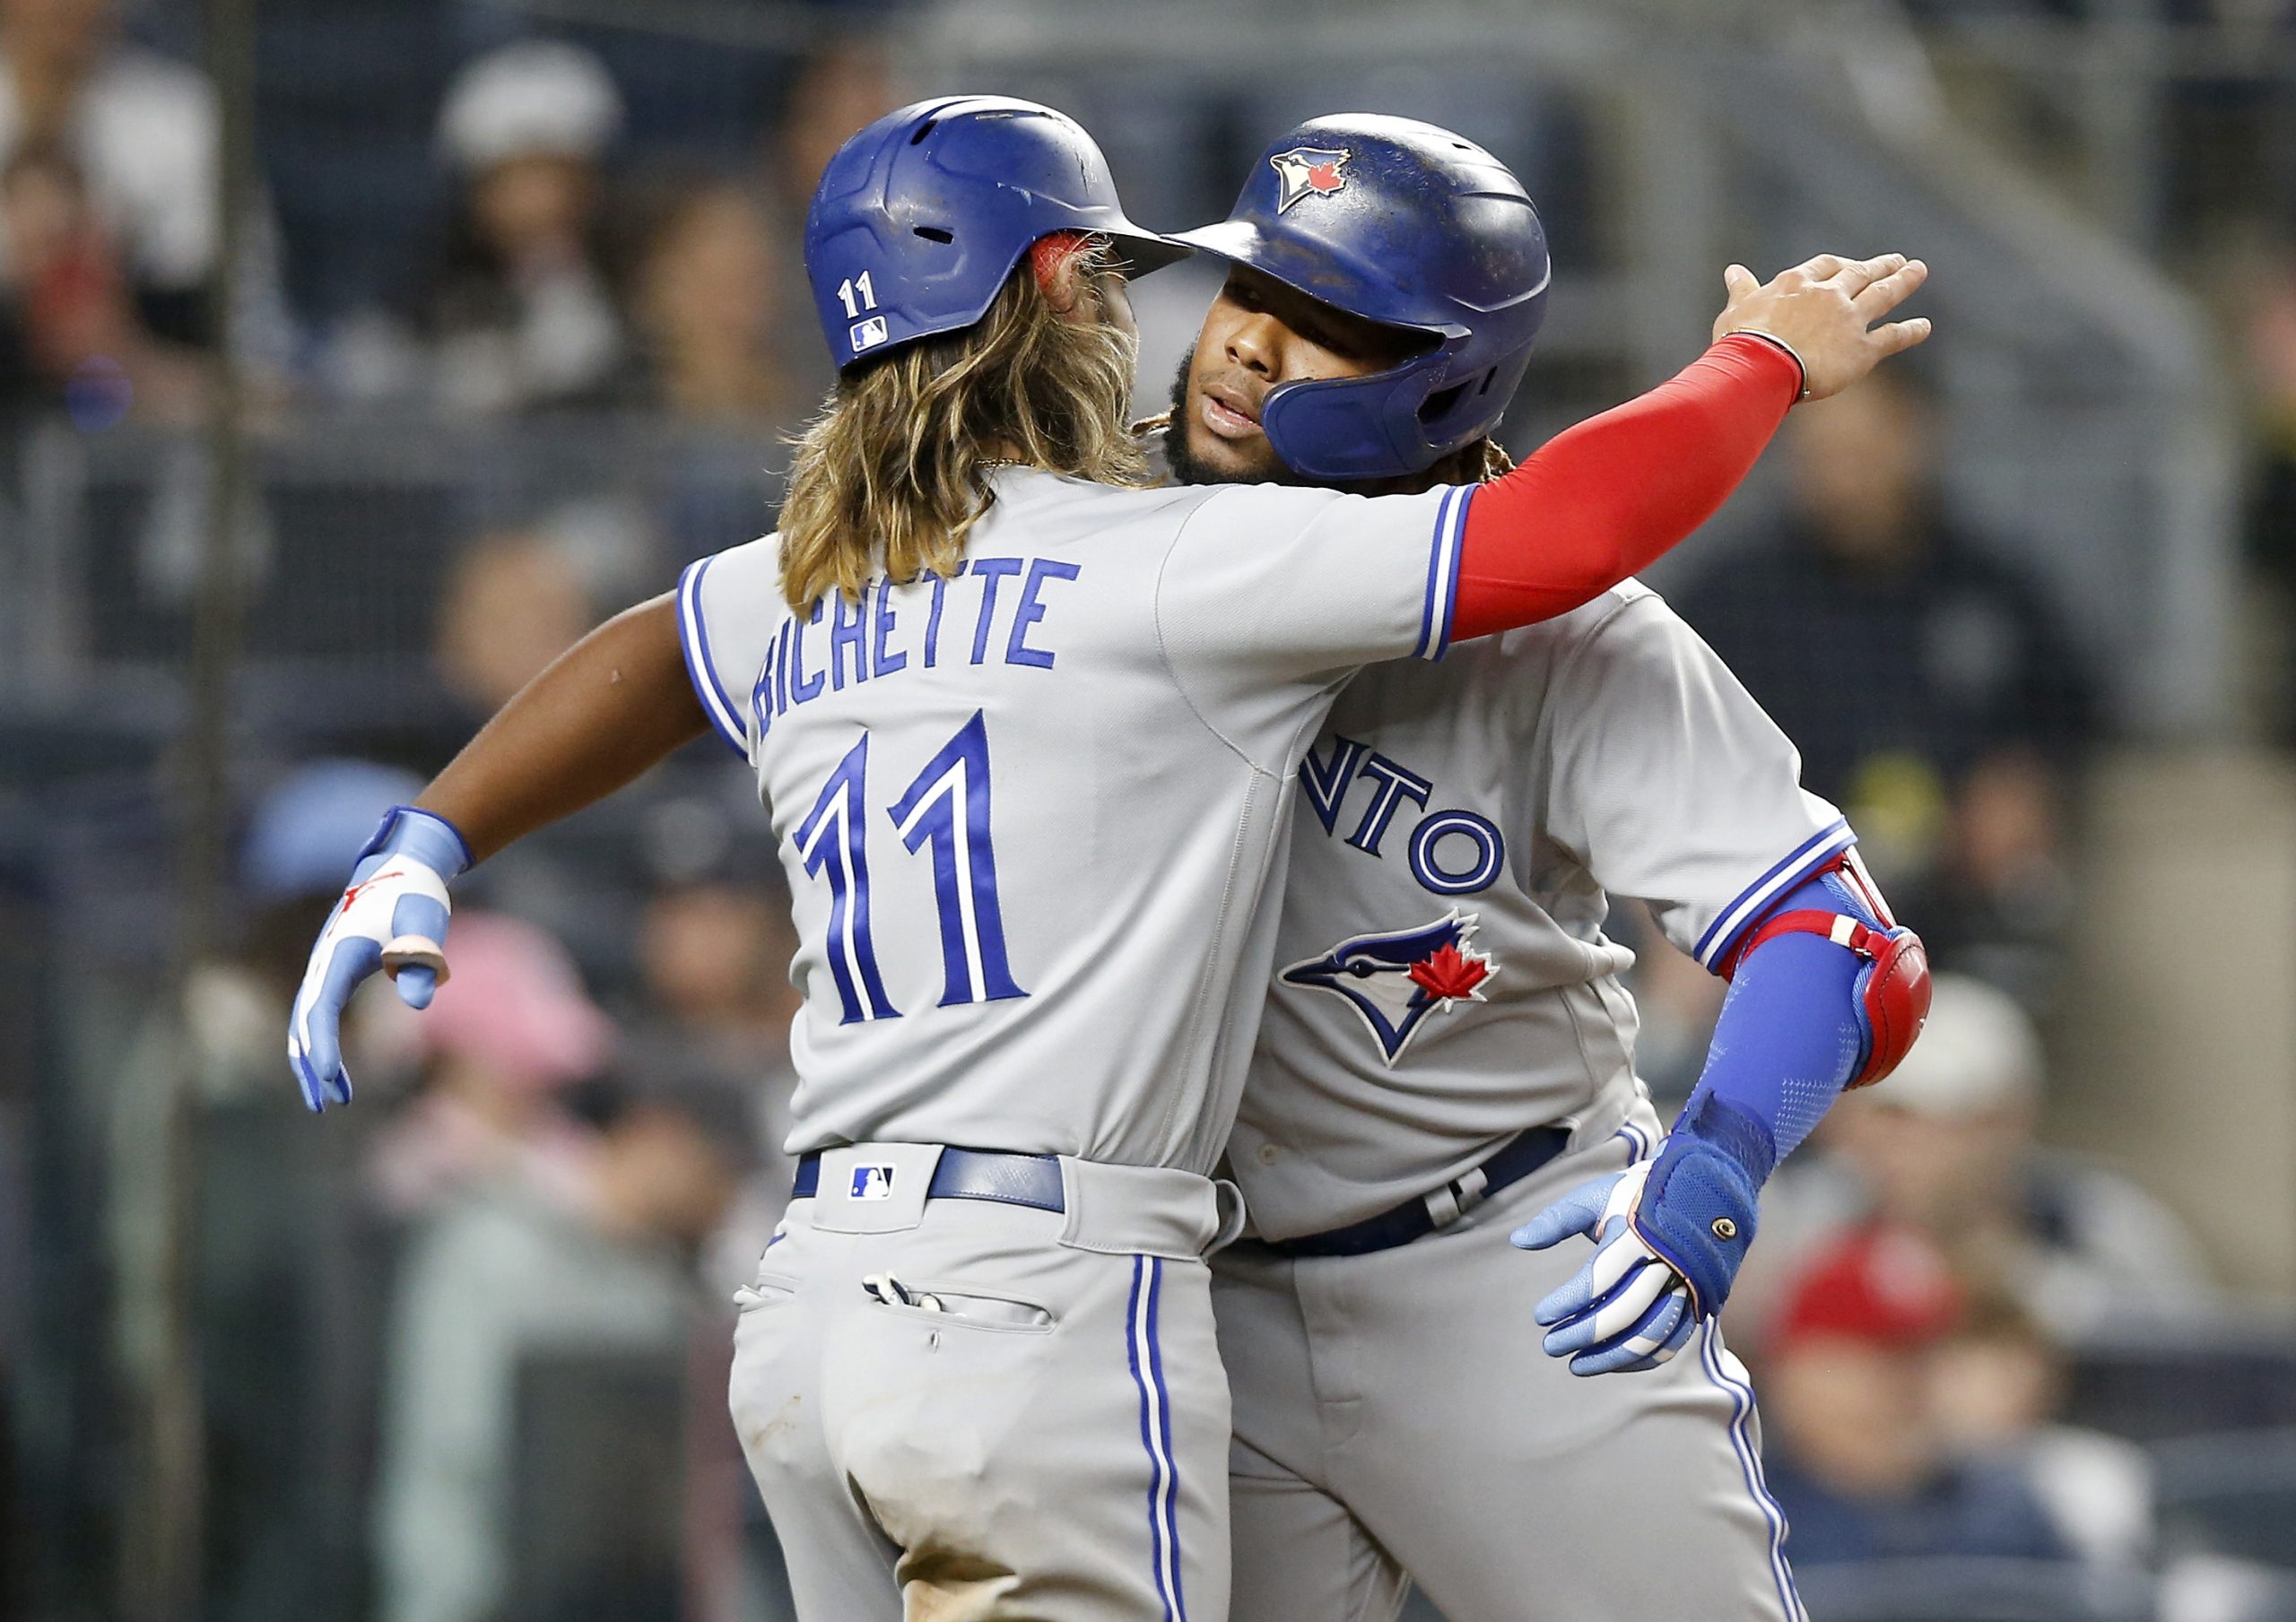 Three-homer night by Guerrero leads Blue Jays in the Bronx